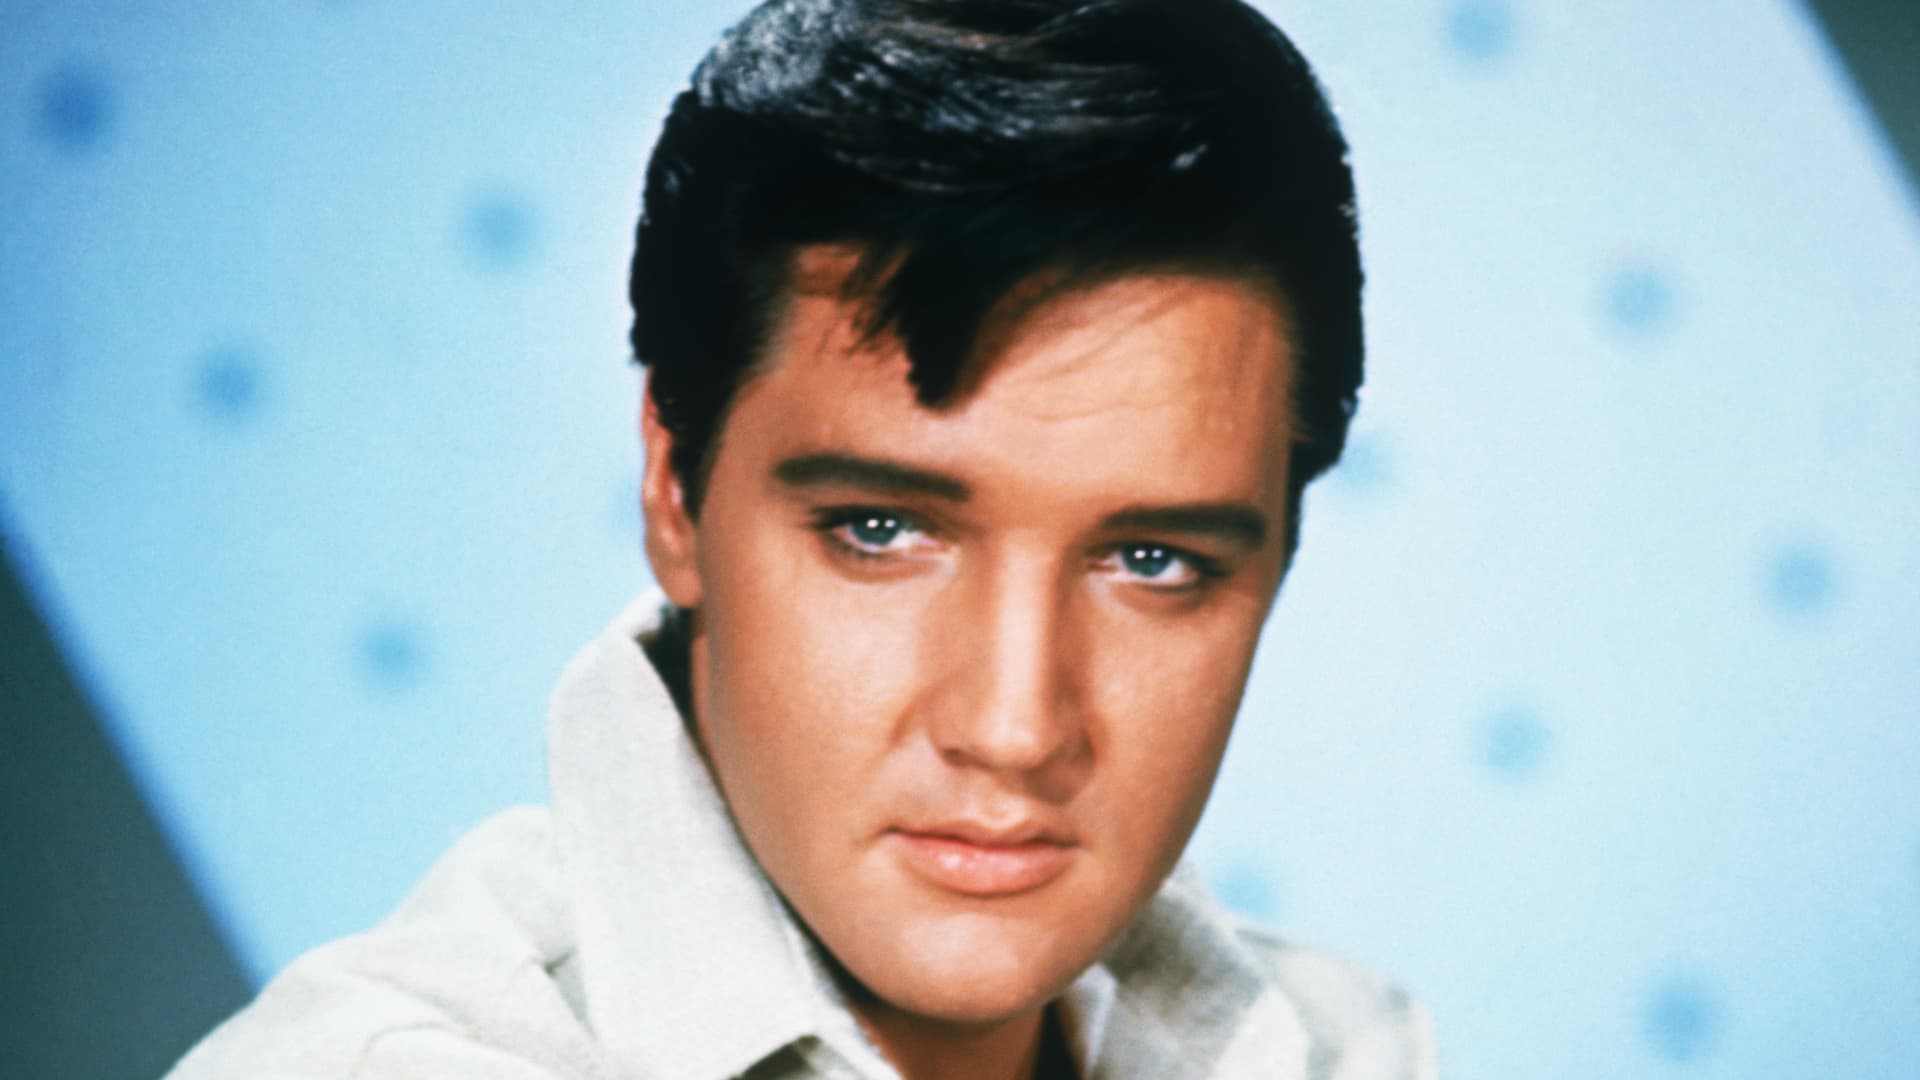 Elvis show to debut in London featuring AI projection